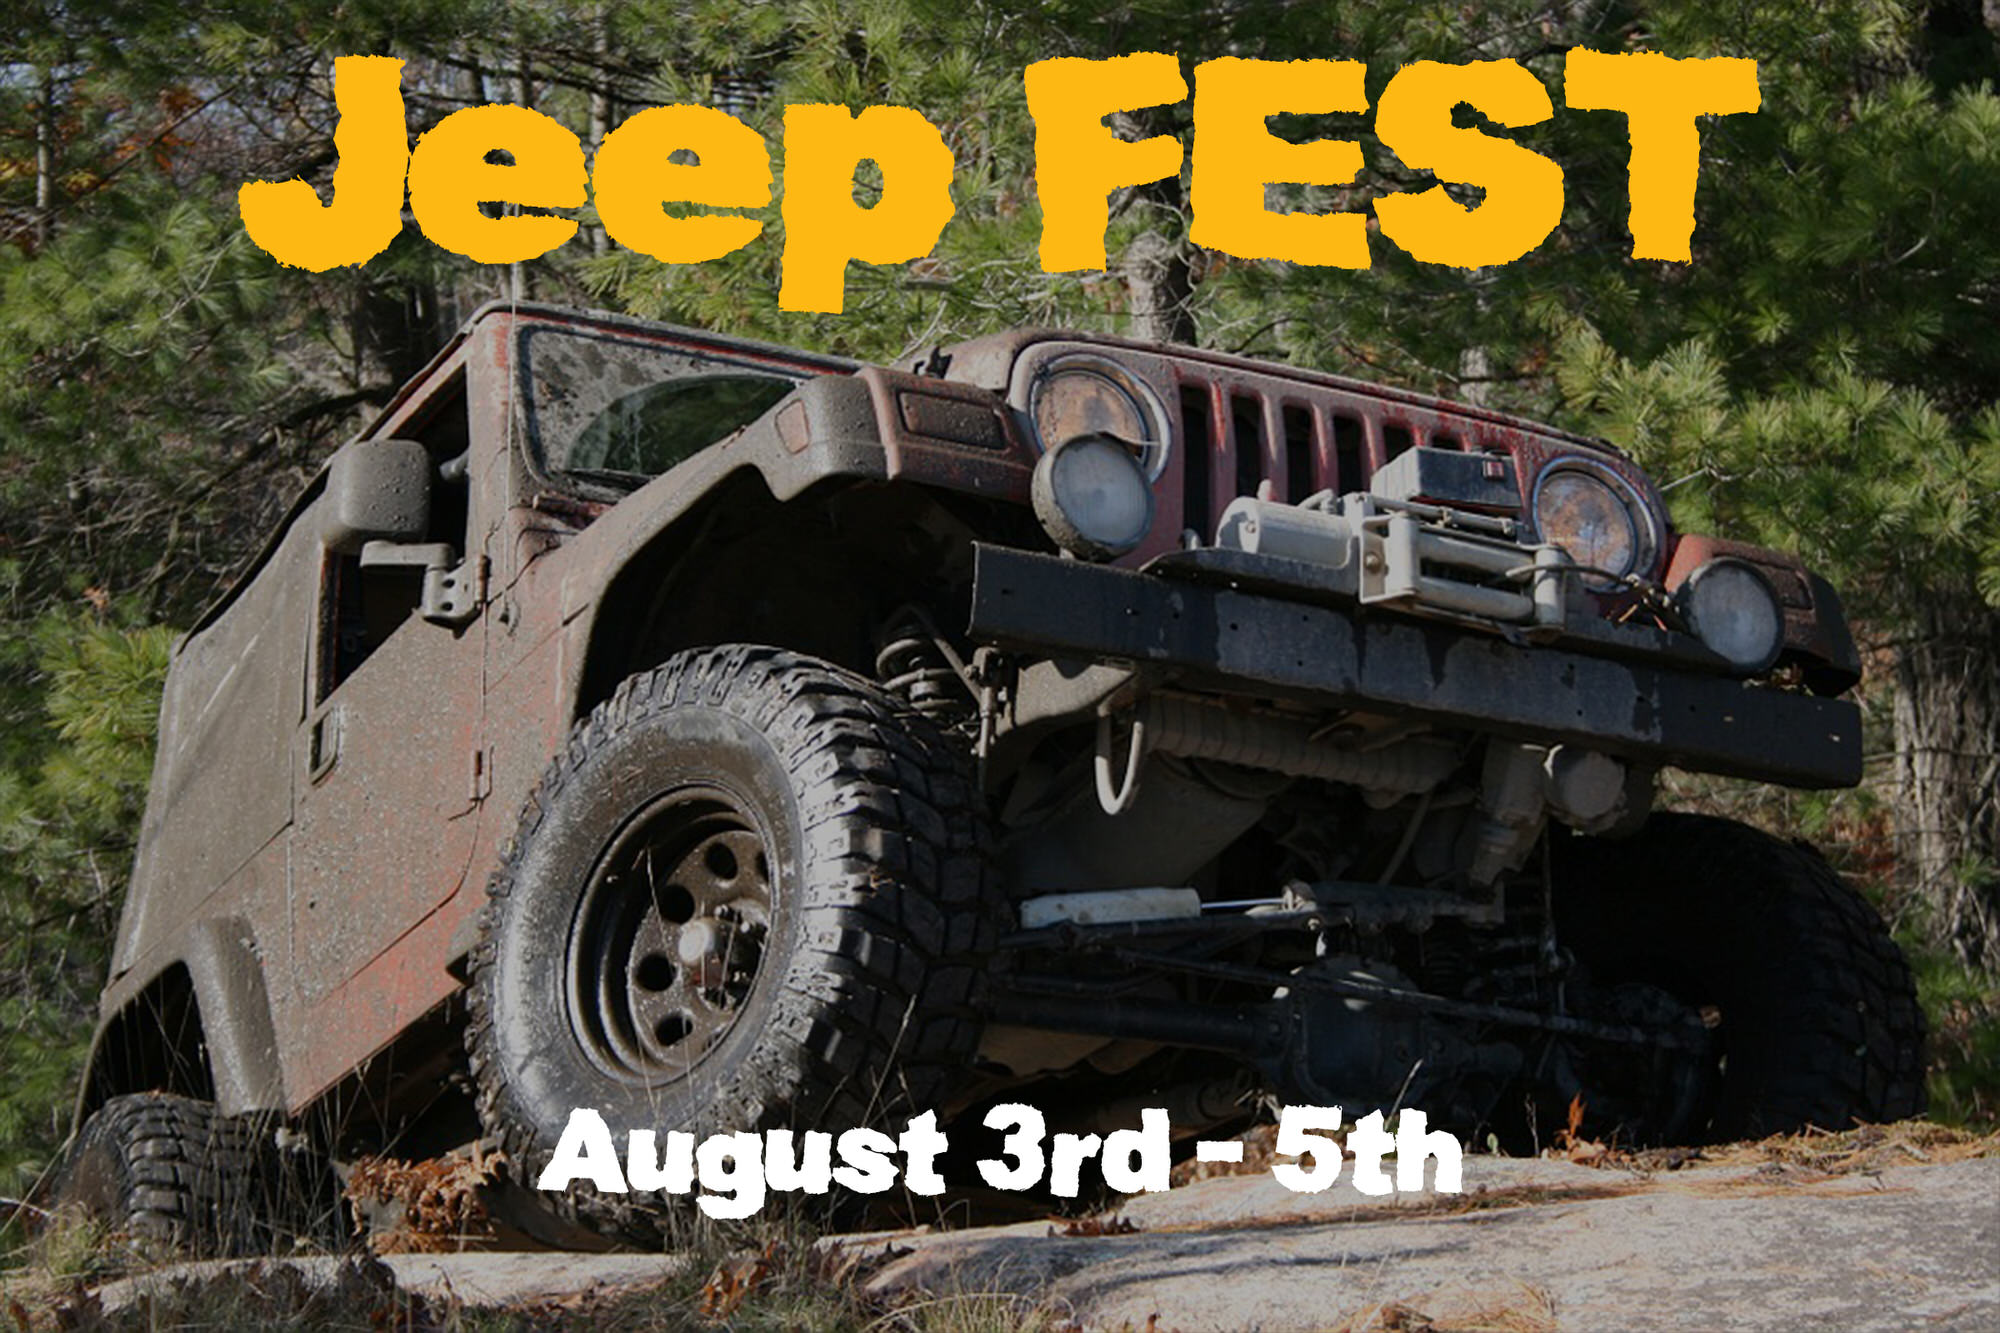 Top Trails Bama Jeep Fest Top Trails Event Tickets